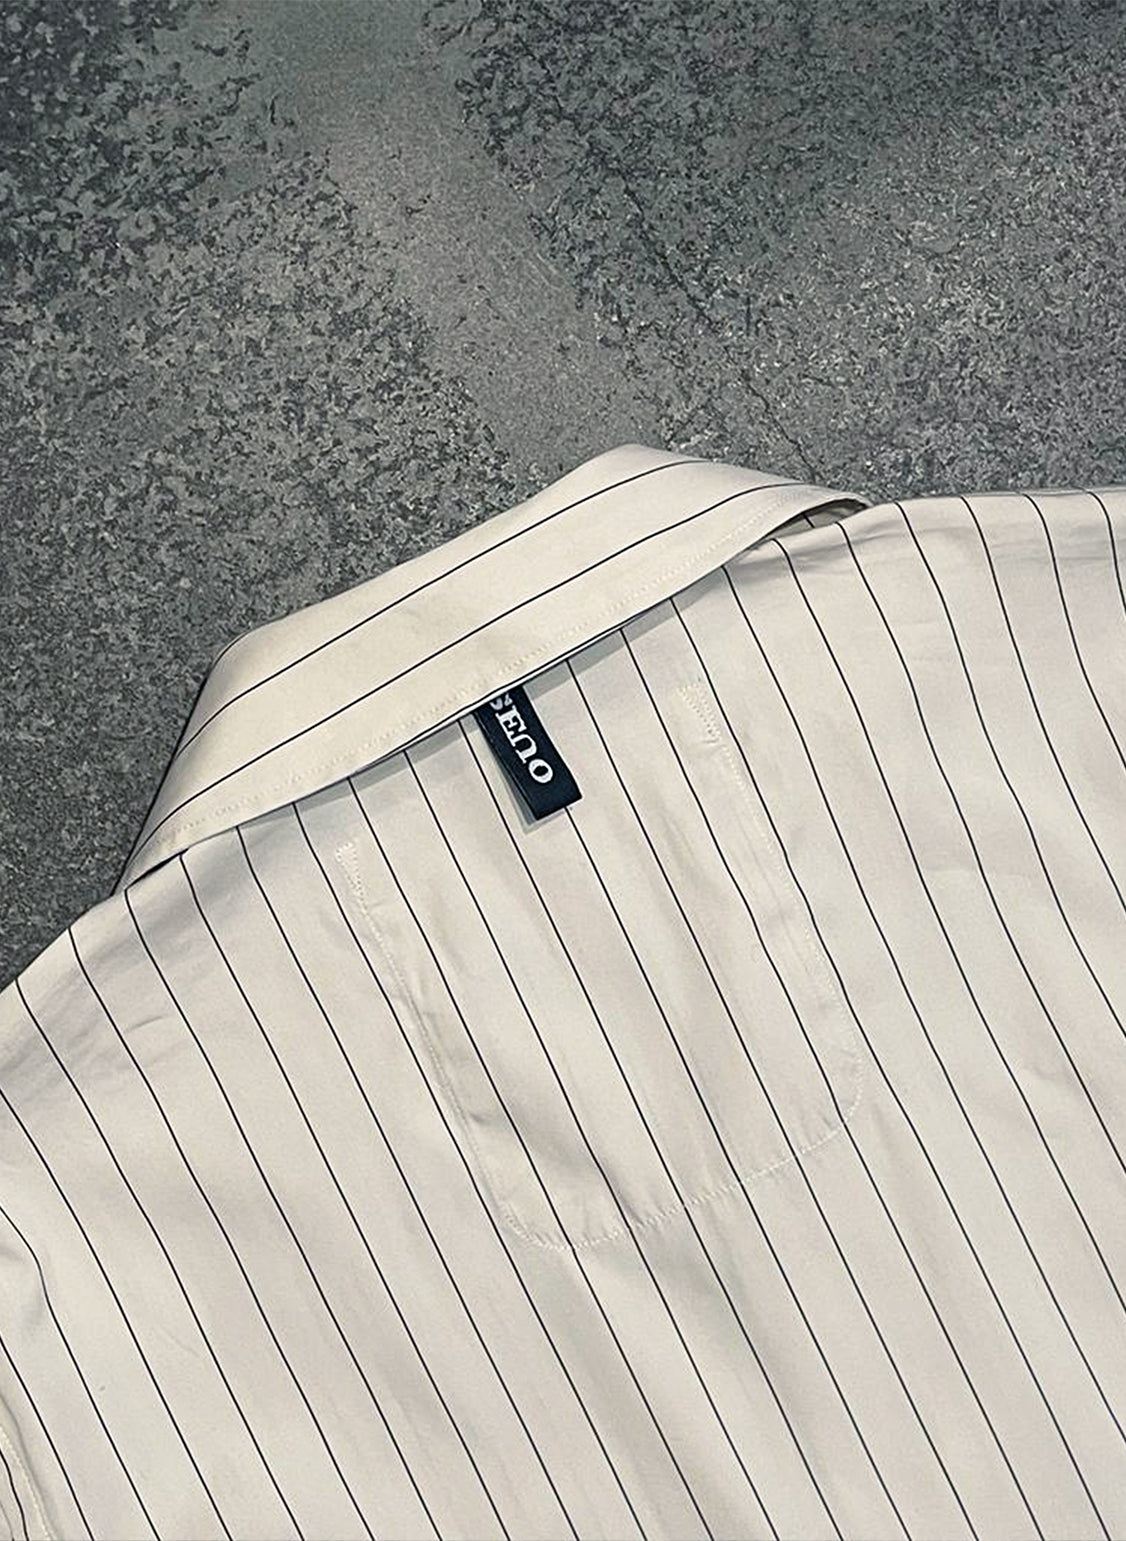 THE HAWAIIAN STRIPED SHIRT IN OFF-WHITE / BLACK COTTON